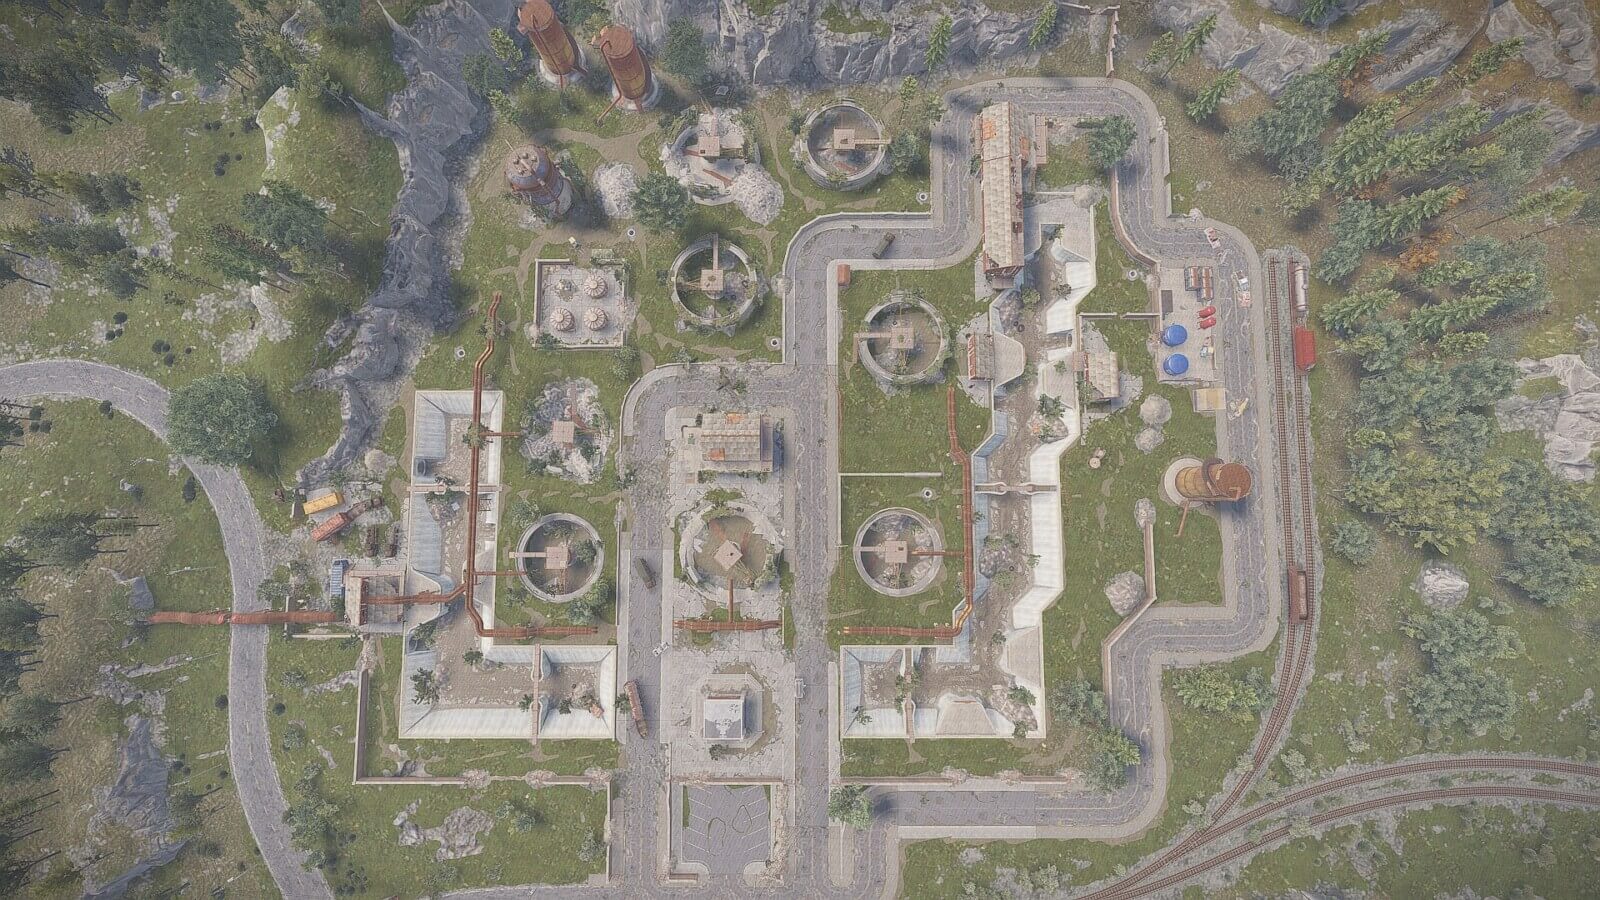 Top down view of the customized water treatment plant monument within Rust on the observer island map.